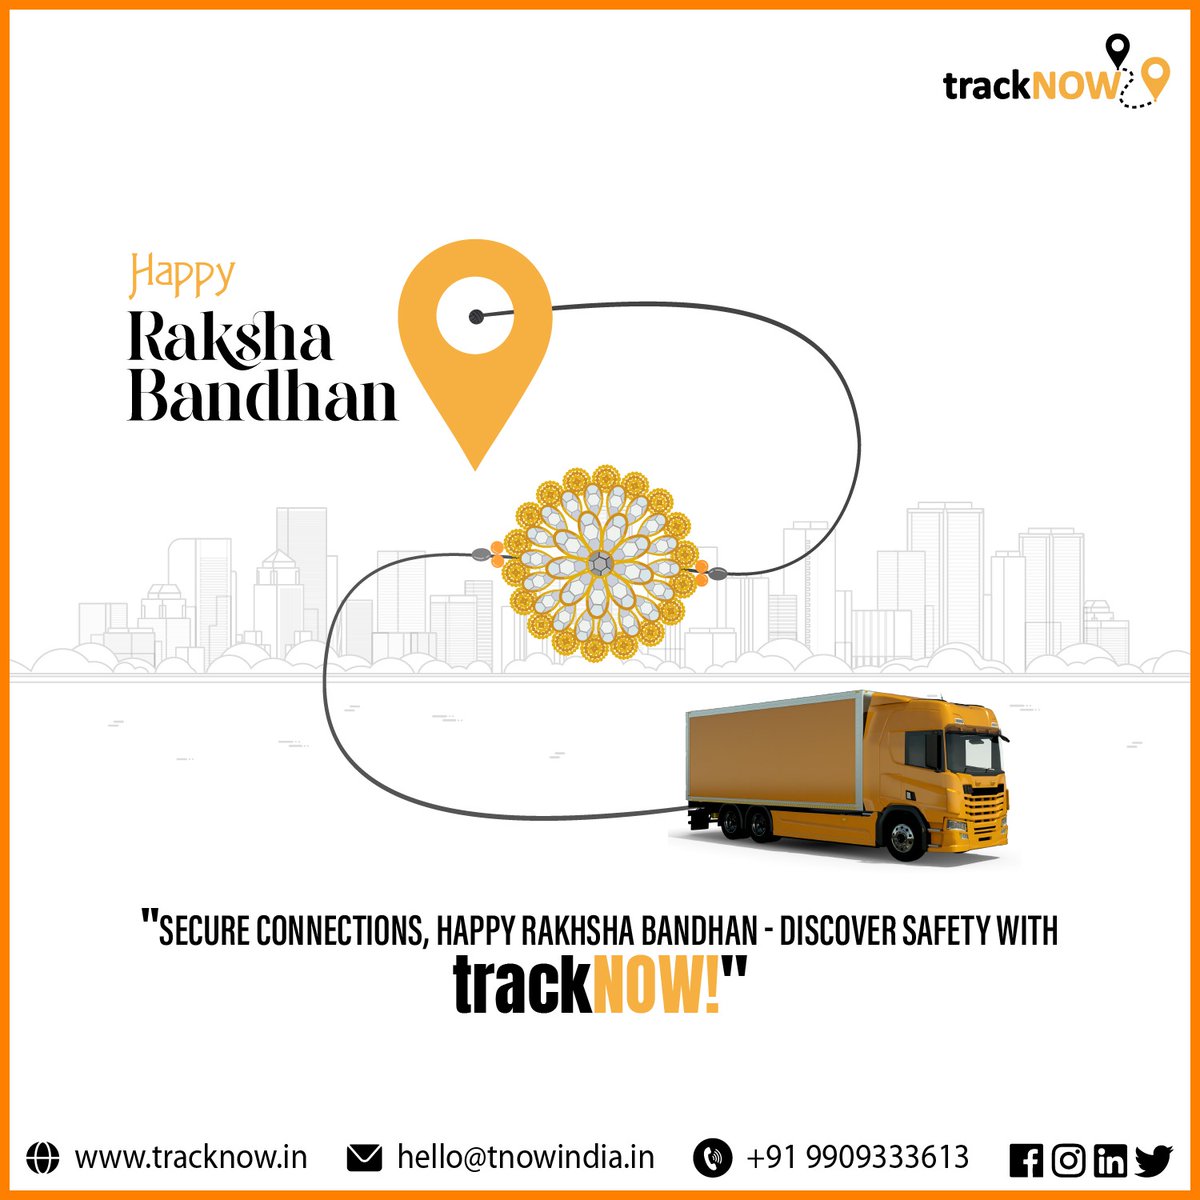 'Happy Raksha Bandhan! 

@Tracknow 
tracknow.in

#happyrakshabandhan #secureconnections #tracknow #safetyfirst #reliability #peaceofmind #festiveseason #securetechnology #tracking #securitysolutions #familyprotection #safetravels #peacefulmind #connectedsecurity